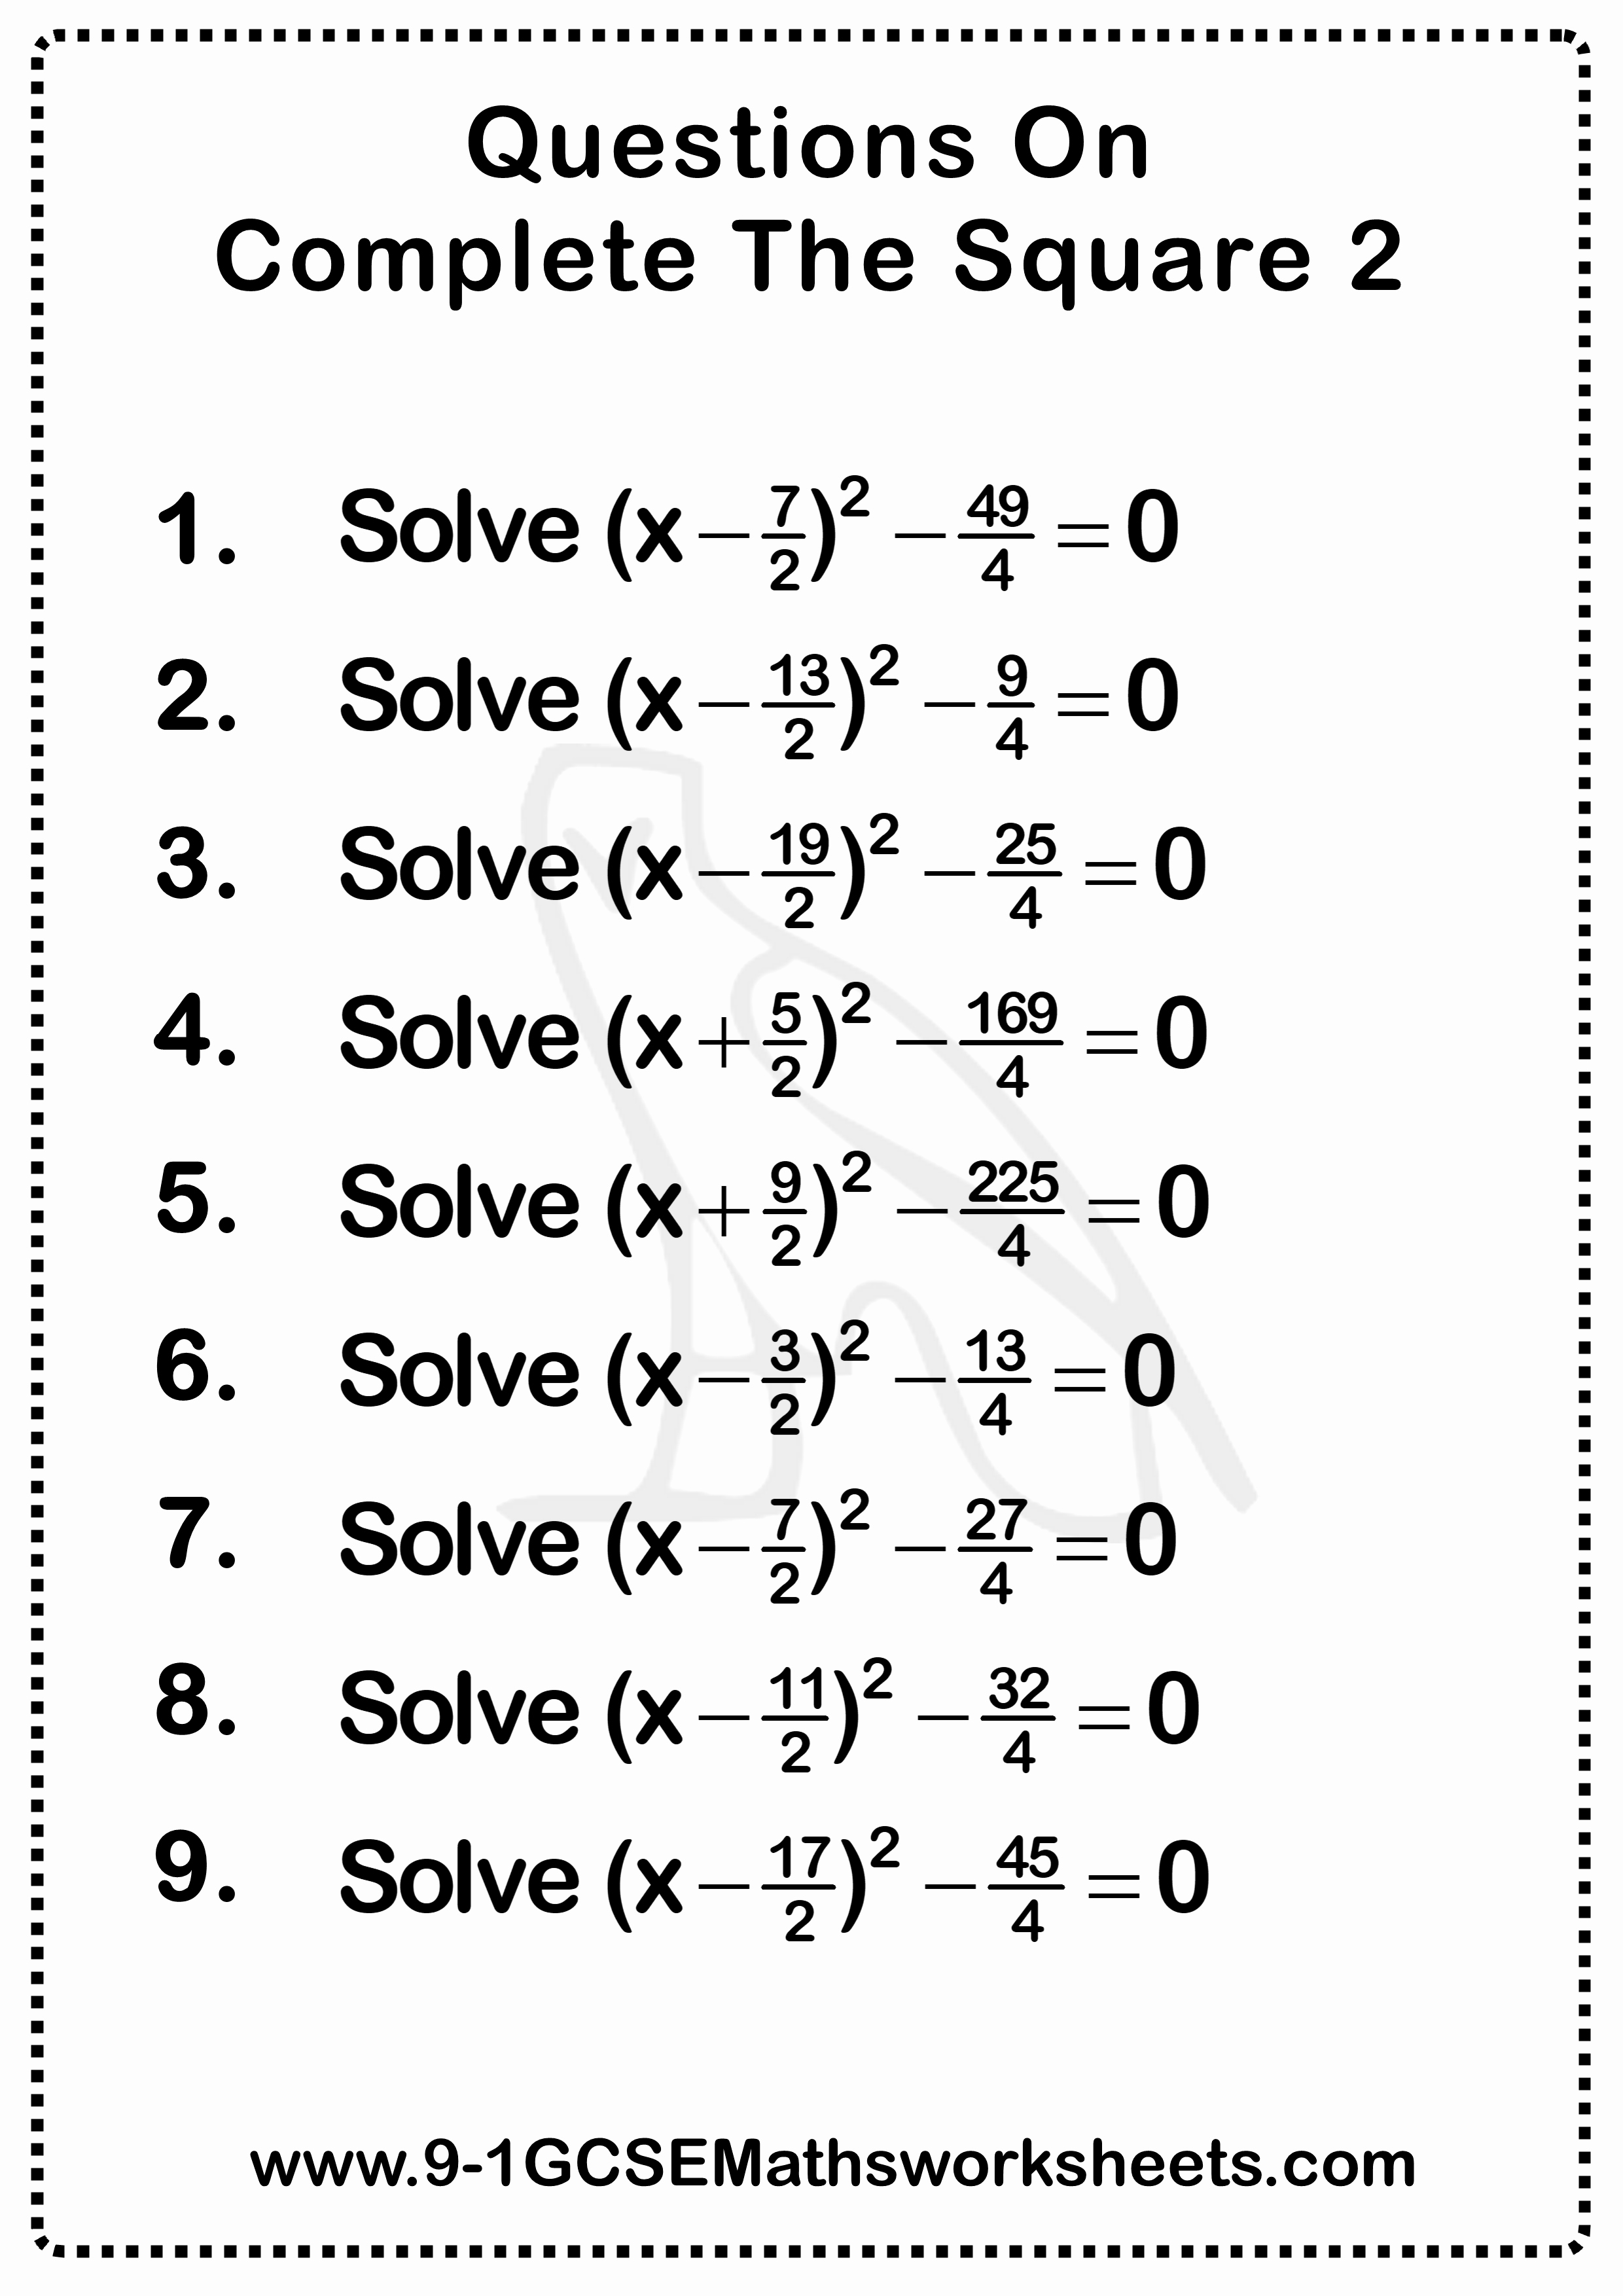 Completing the Square Practice Worksheet Awesome Pleting the Square Worksheet Practice Questions